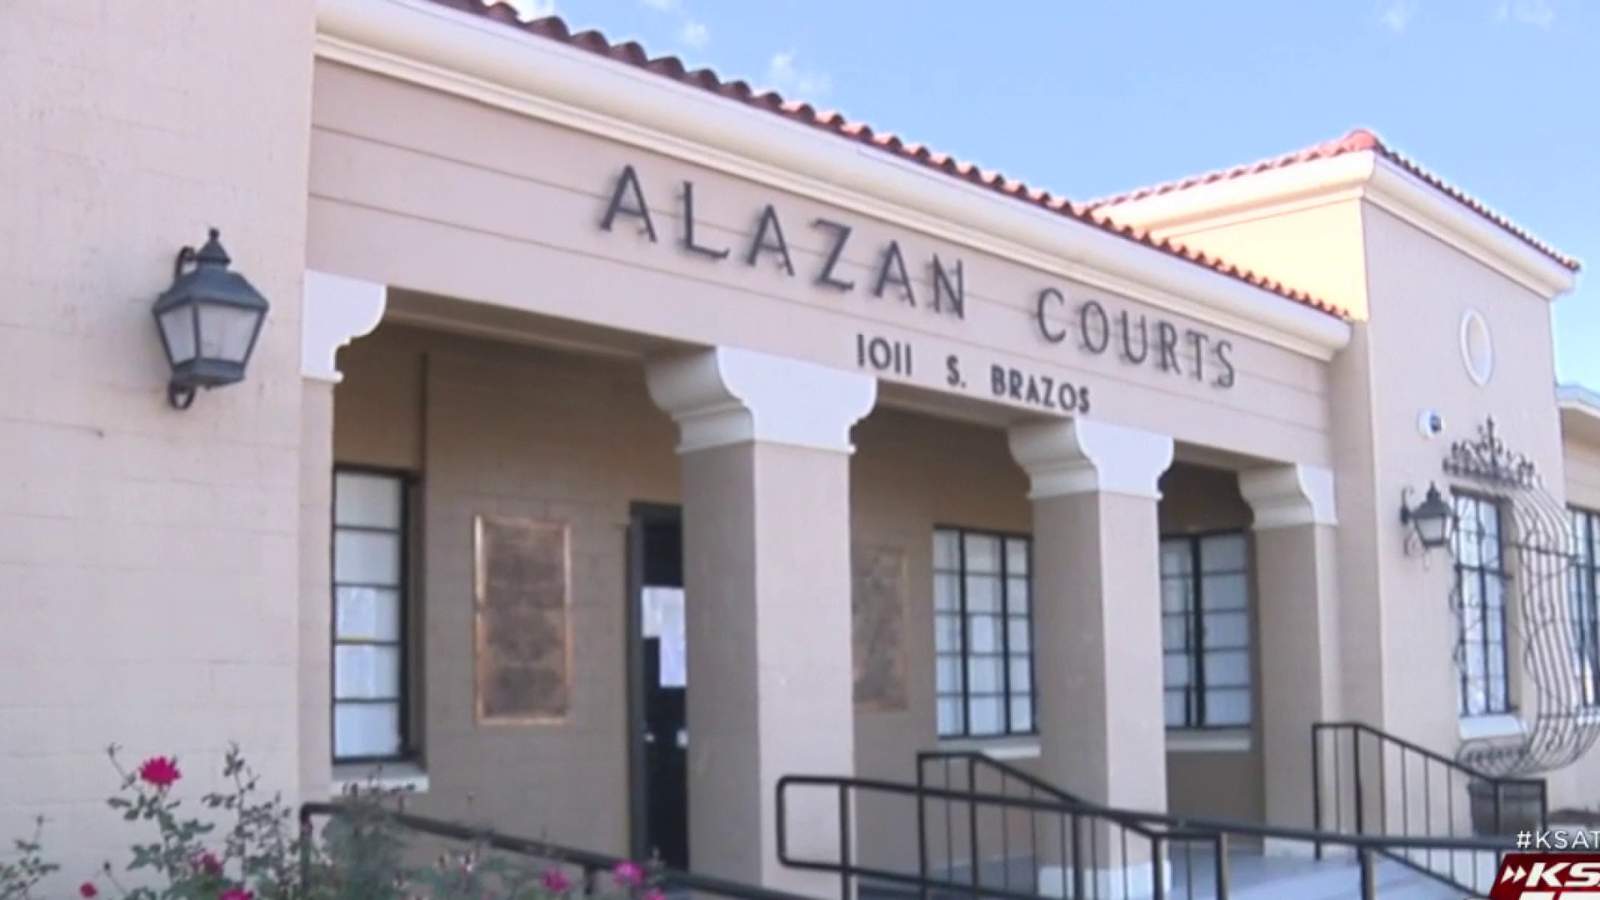 Over half of the toys collected for kids at Alazan Apache Courts were stolen, SA Housing Authority says